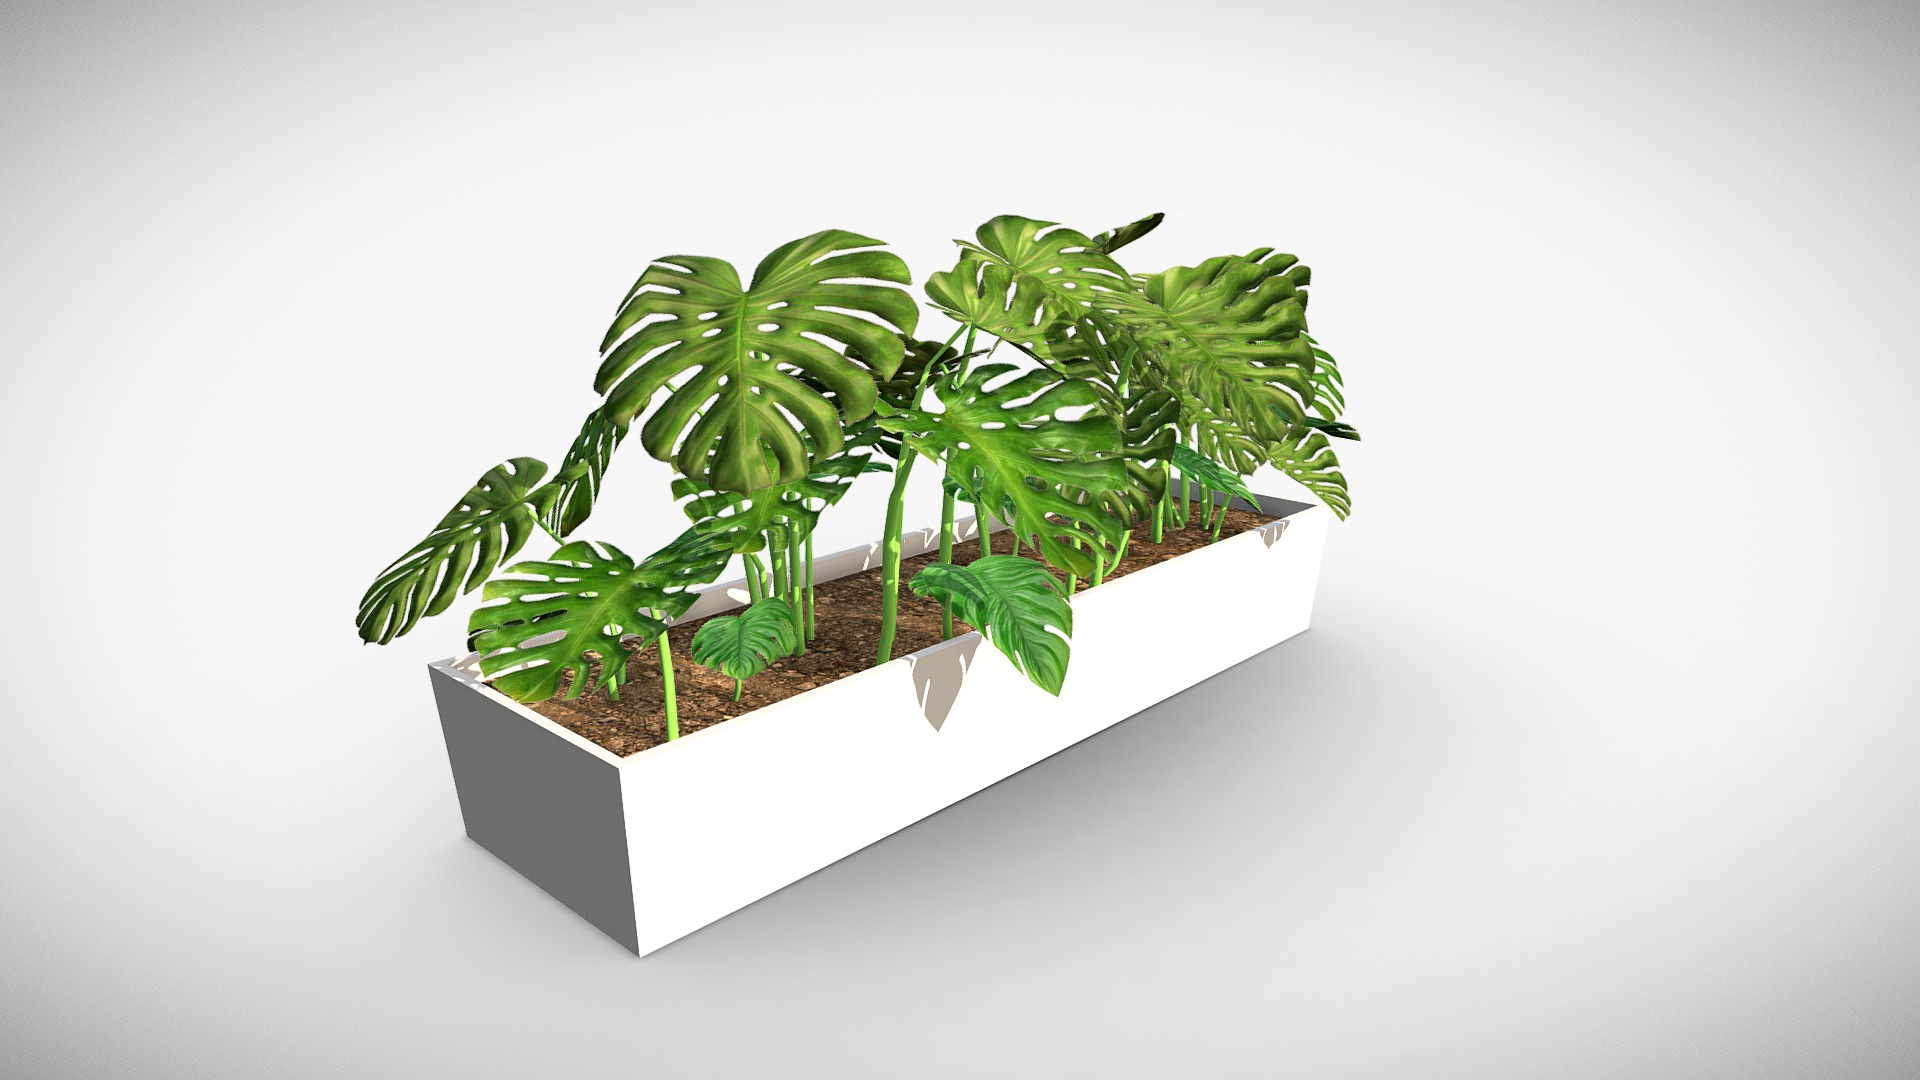 3D model Monstera deliciosa-2 low poly - This is a 3D model of the Monstera deliciosa-2 low poly. The 3D model is about a plant in a box.